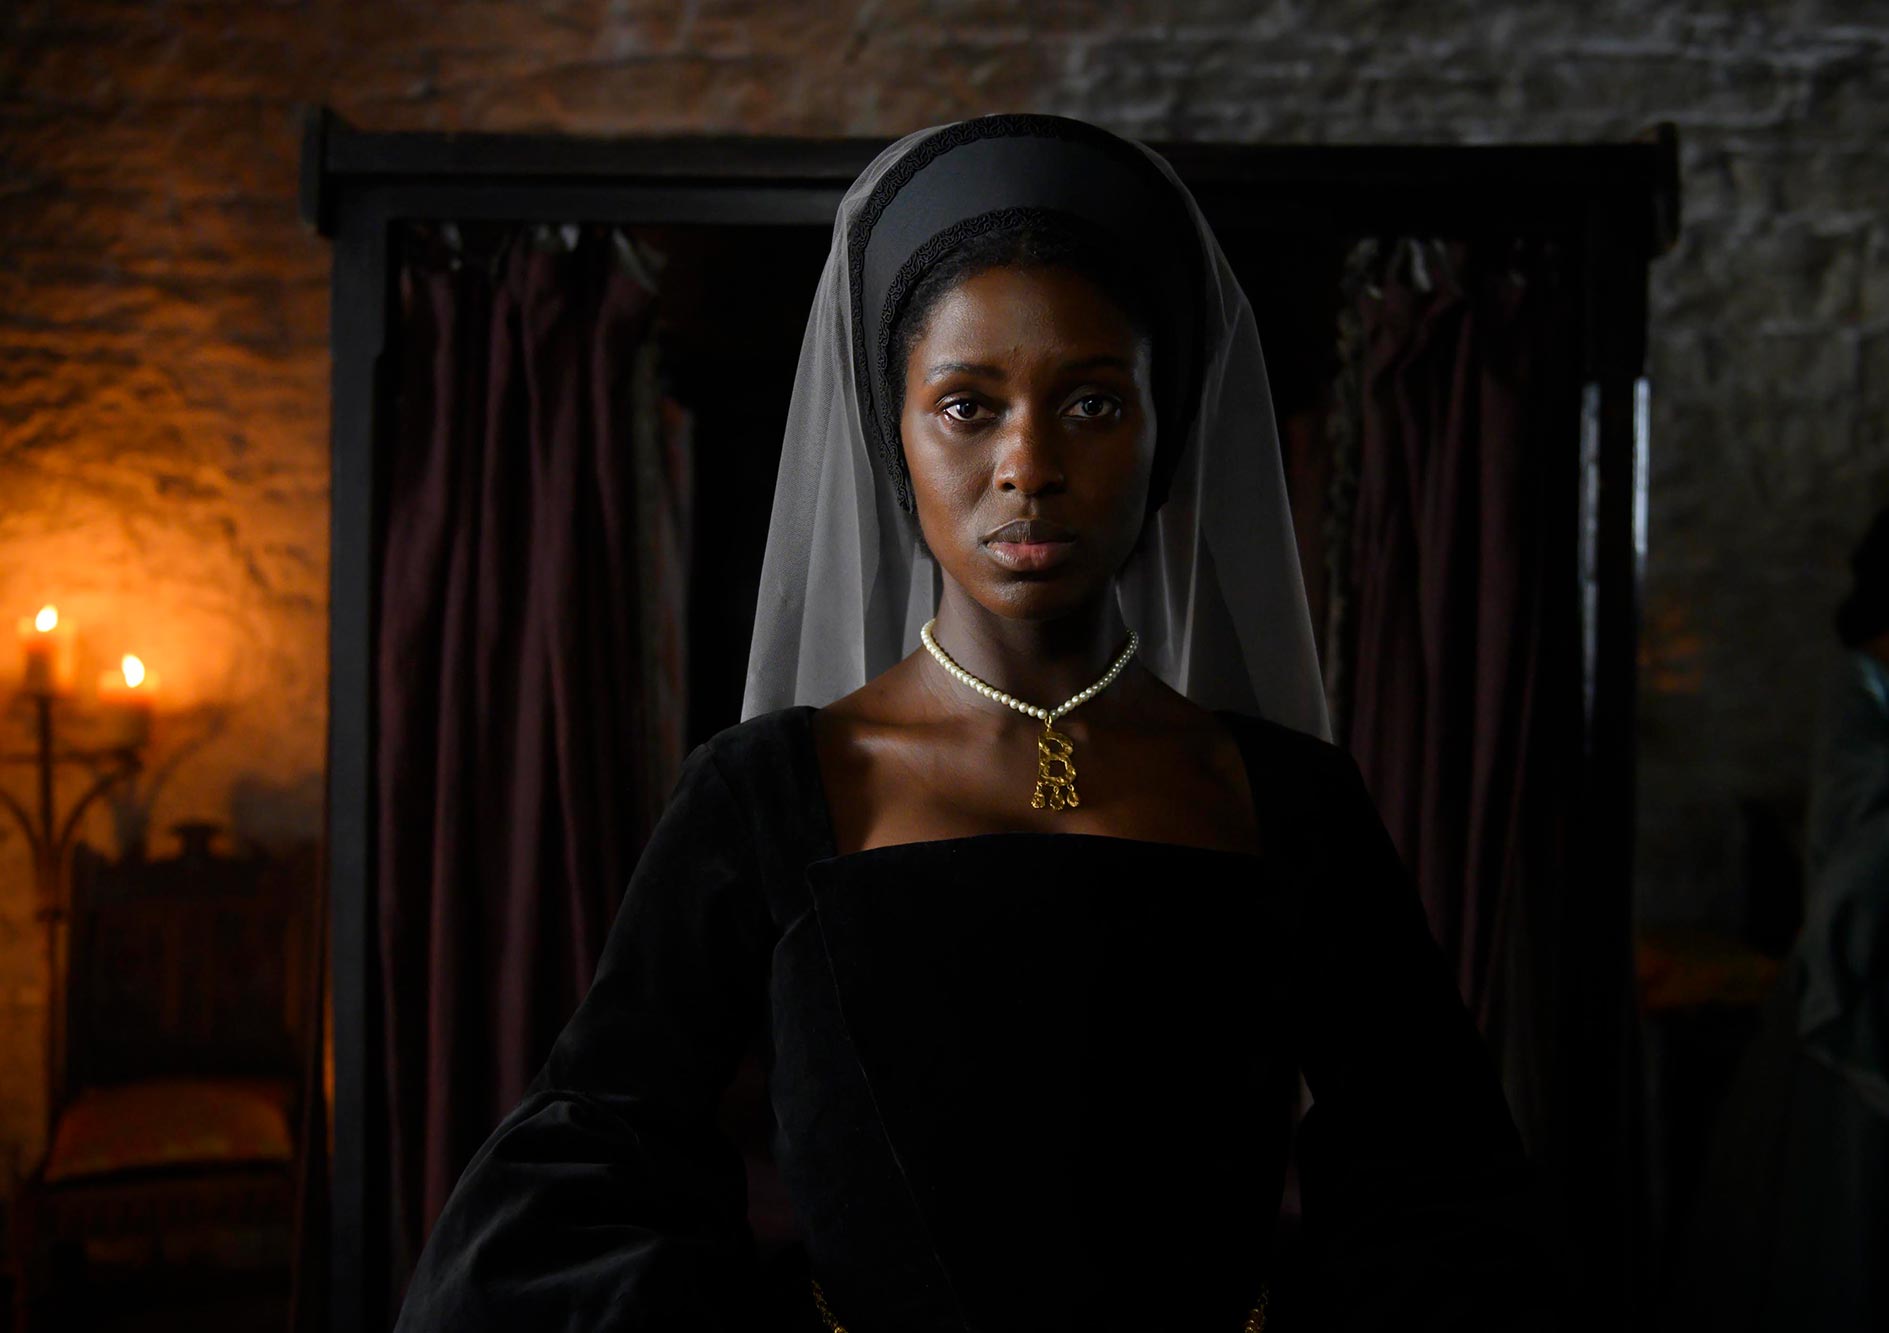 Jodie Turner-Smith's Anne Boleyn takes the throne in first teaser for new series